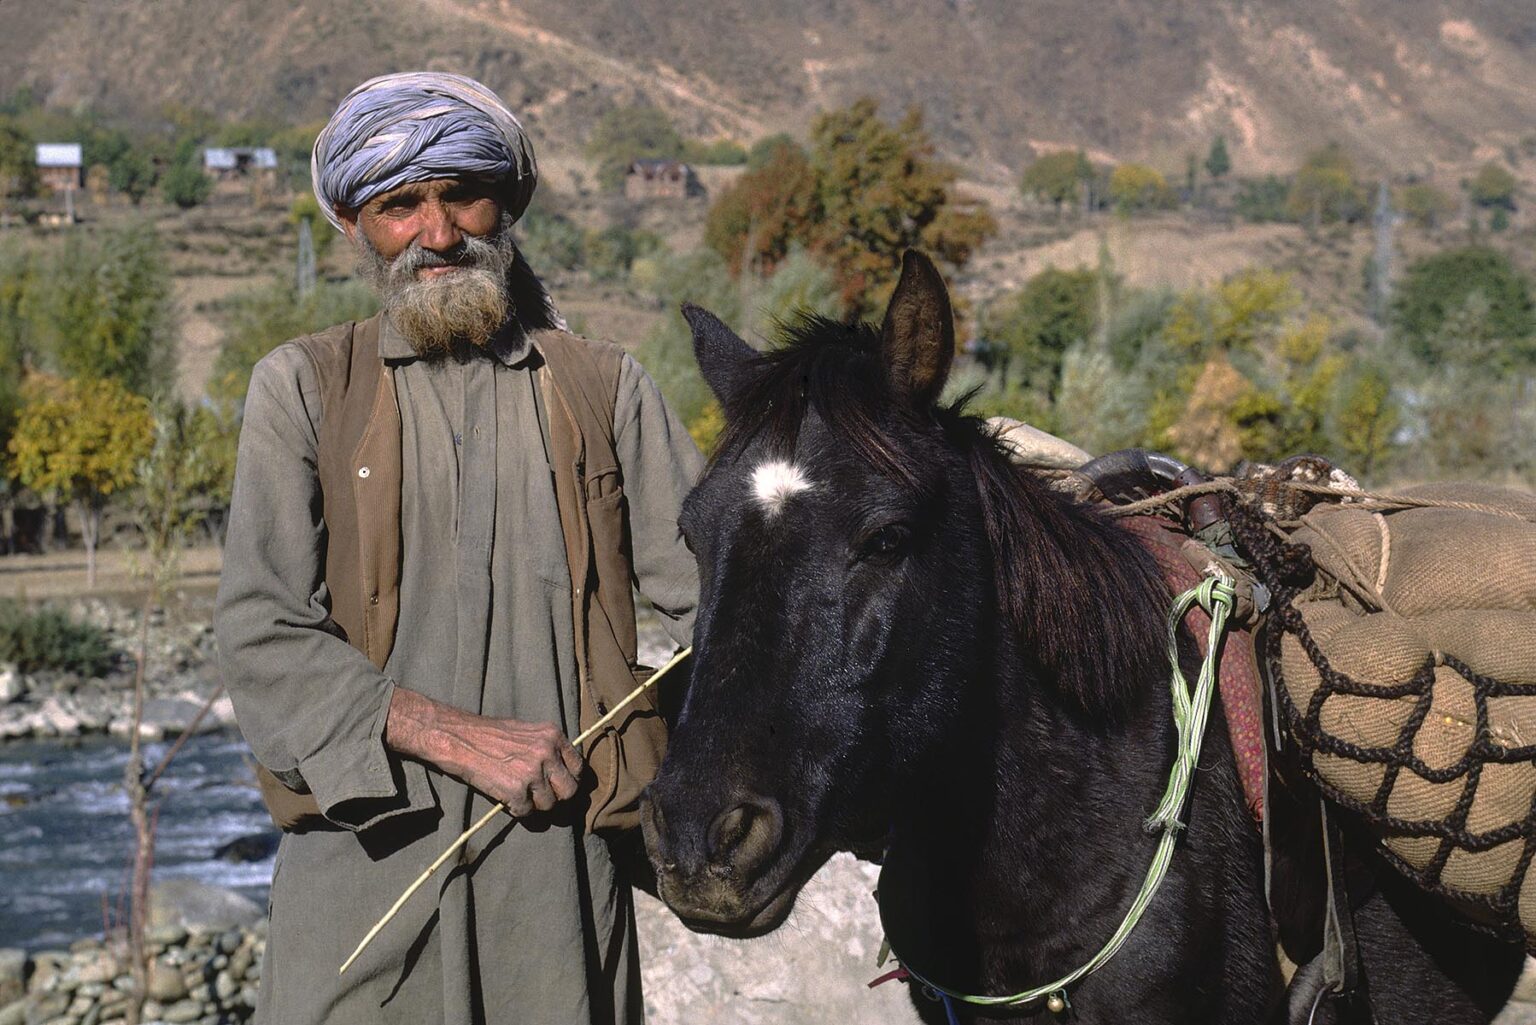 Kashmiri MAN with his HORSE in GULMARG VILLAGE of the HIMALAYAN FOOTHILLS - KASHMIR, INDIA